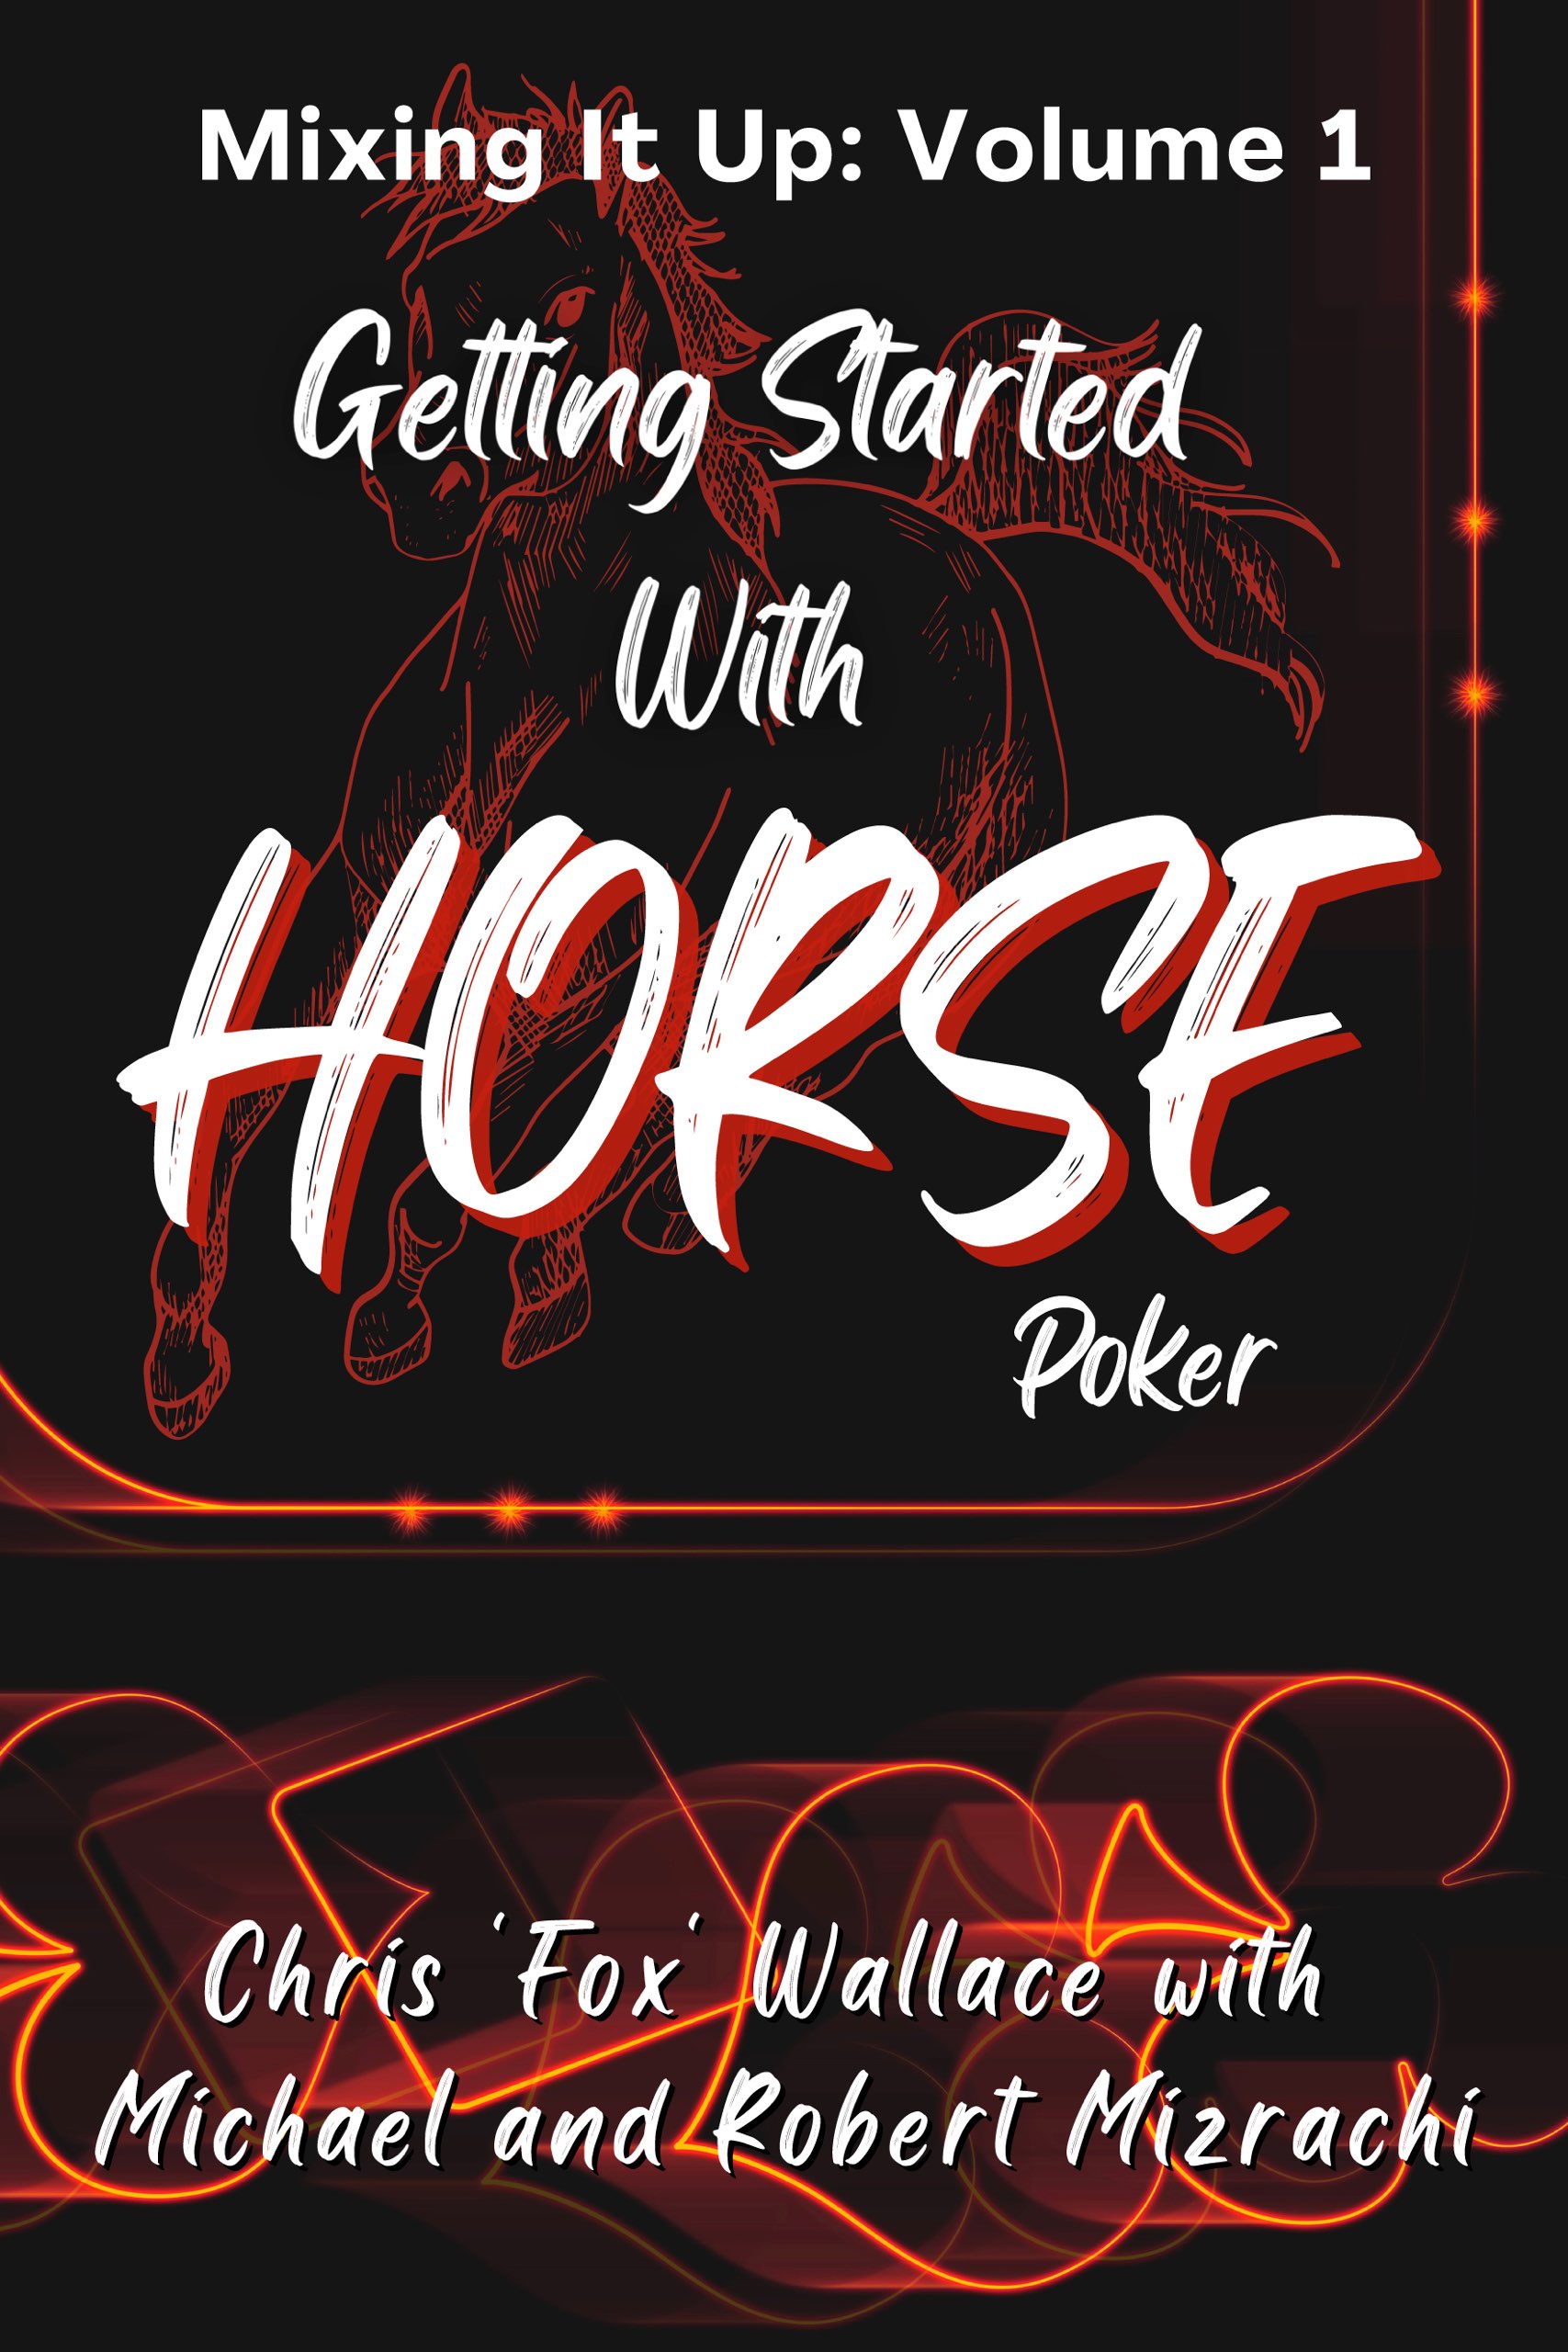 Book Excerpt: “Getting Started With HORSE Poker” by Chris Wallace with Michael and Robert Mizrachi